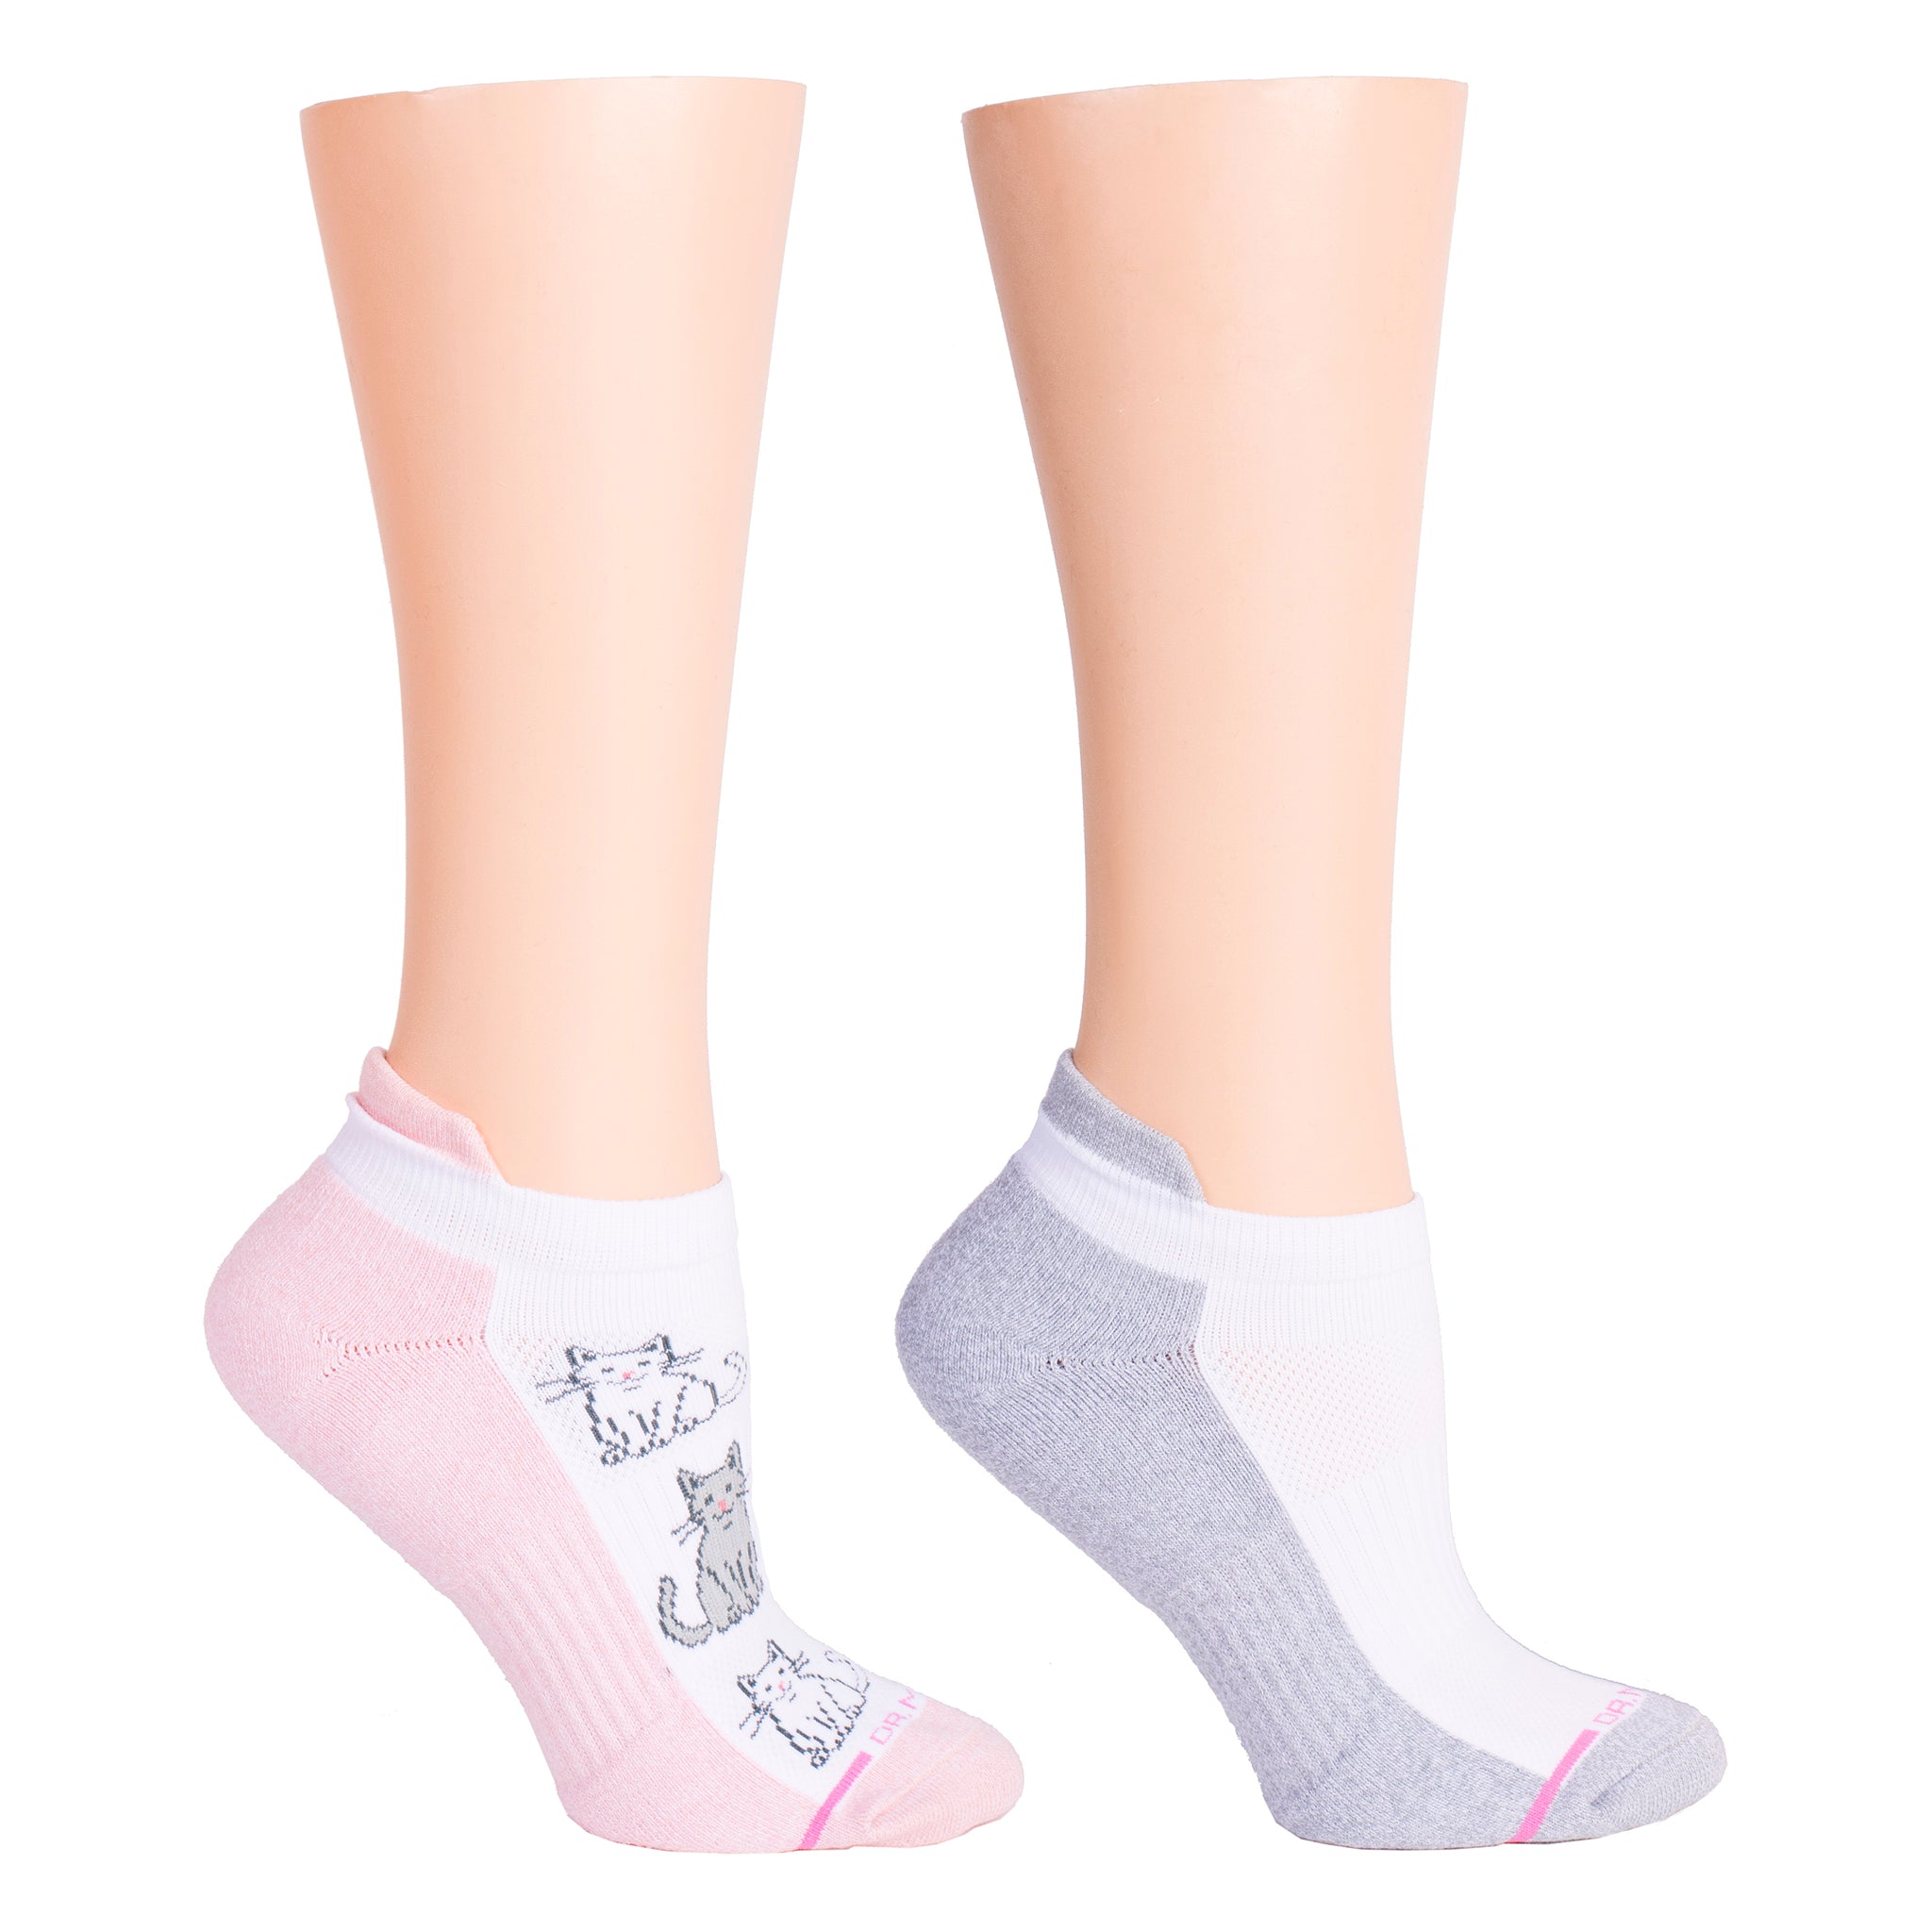 Kitties | Ankle Compression Socks For Women